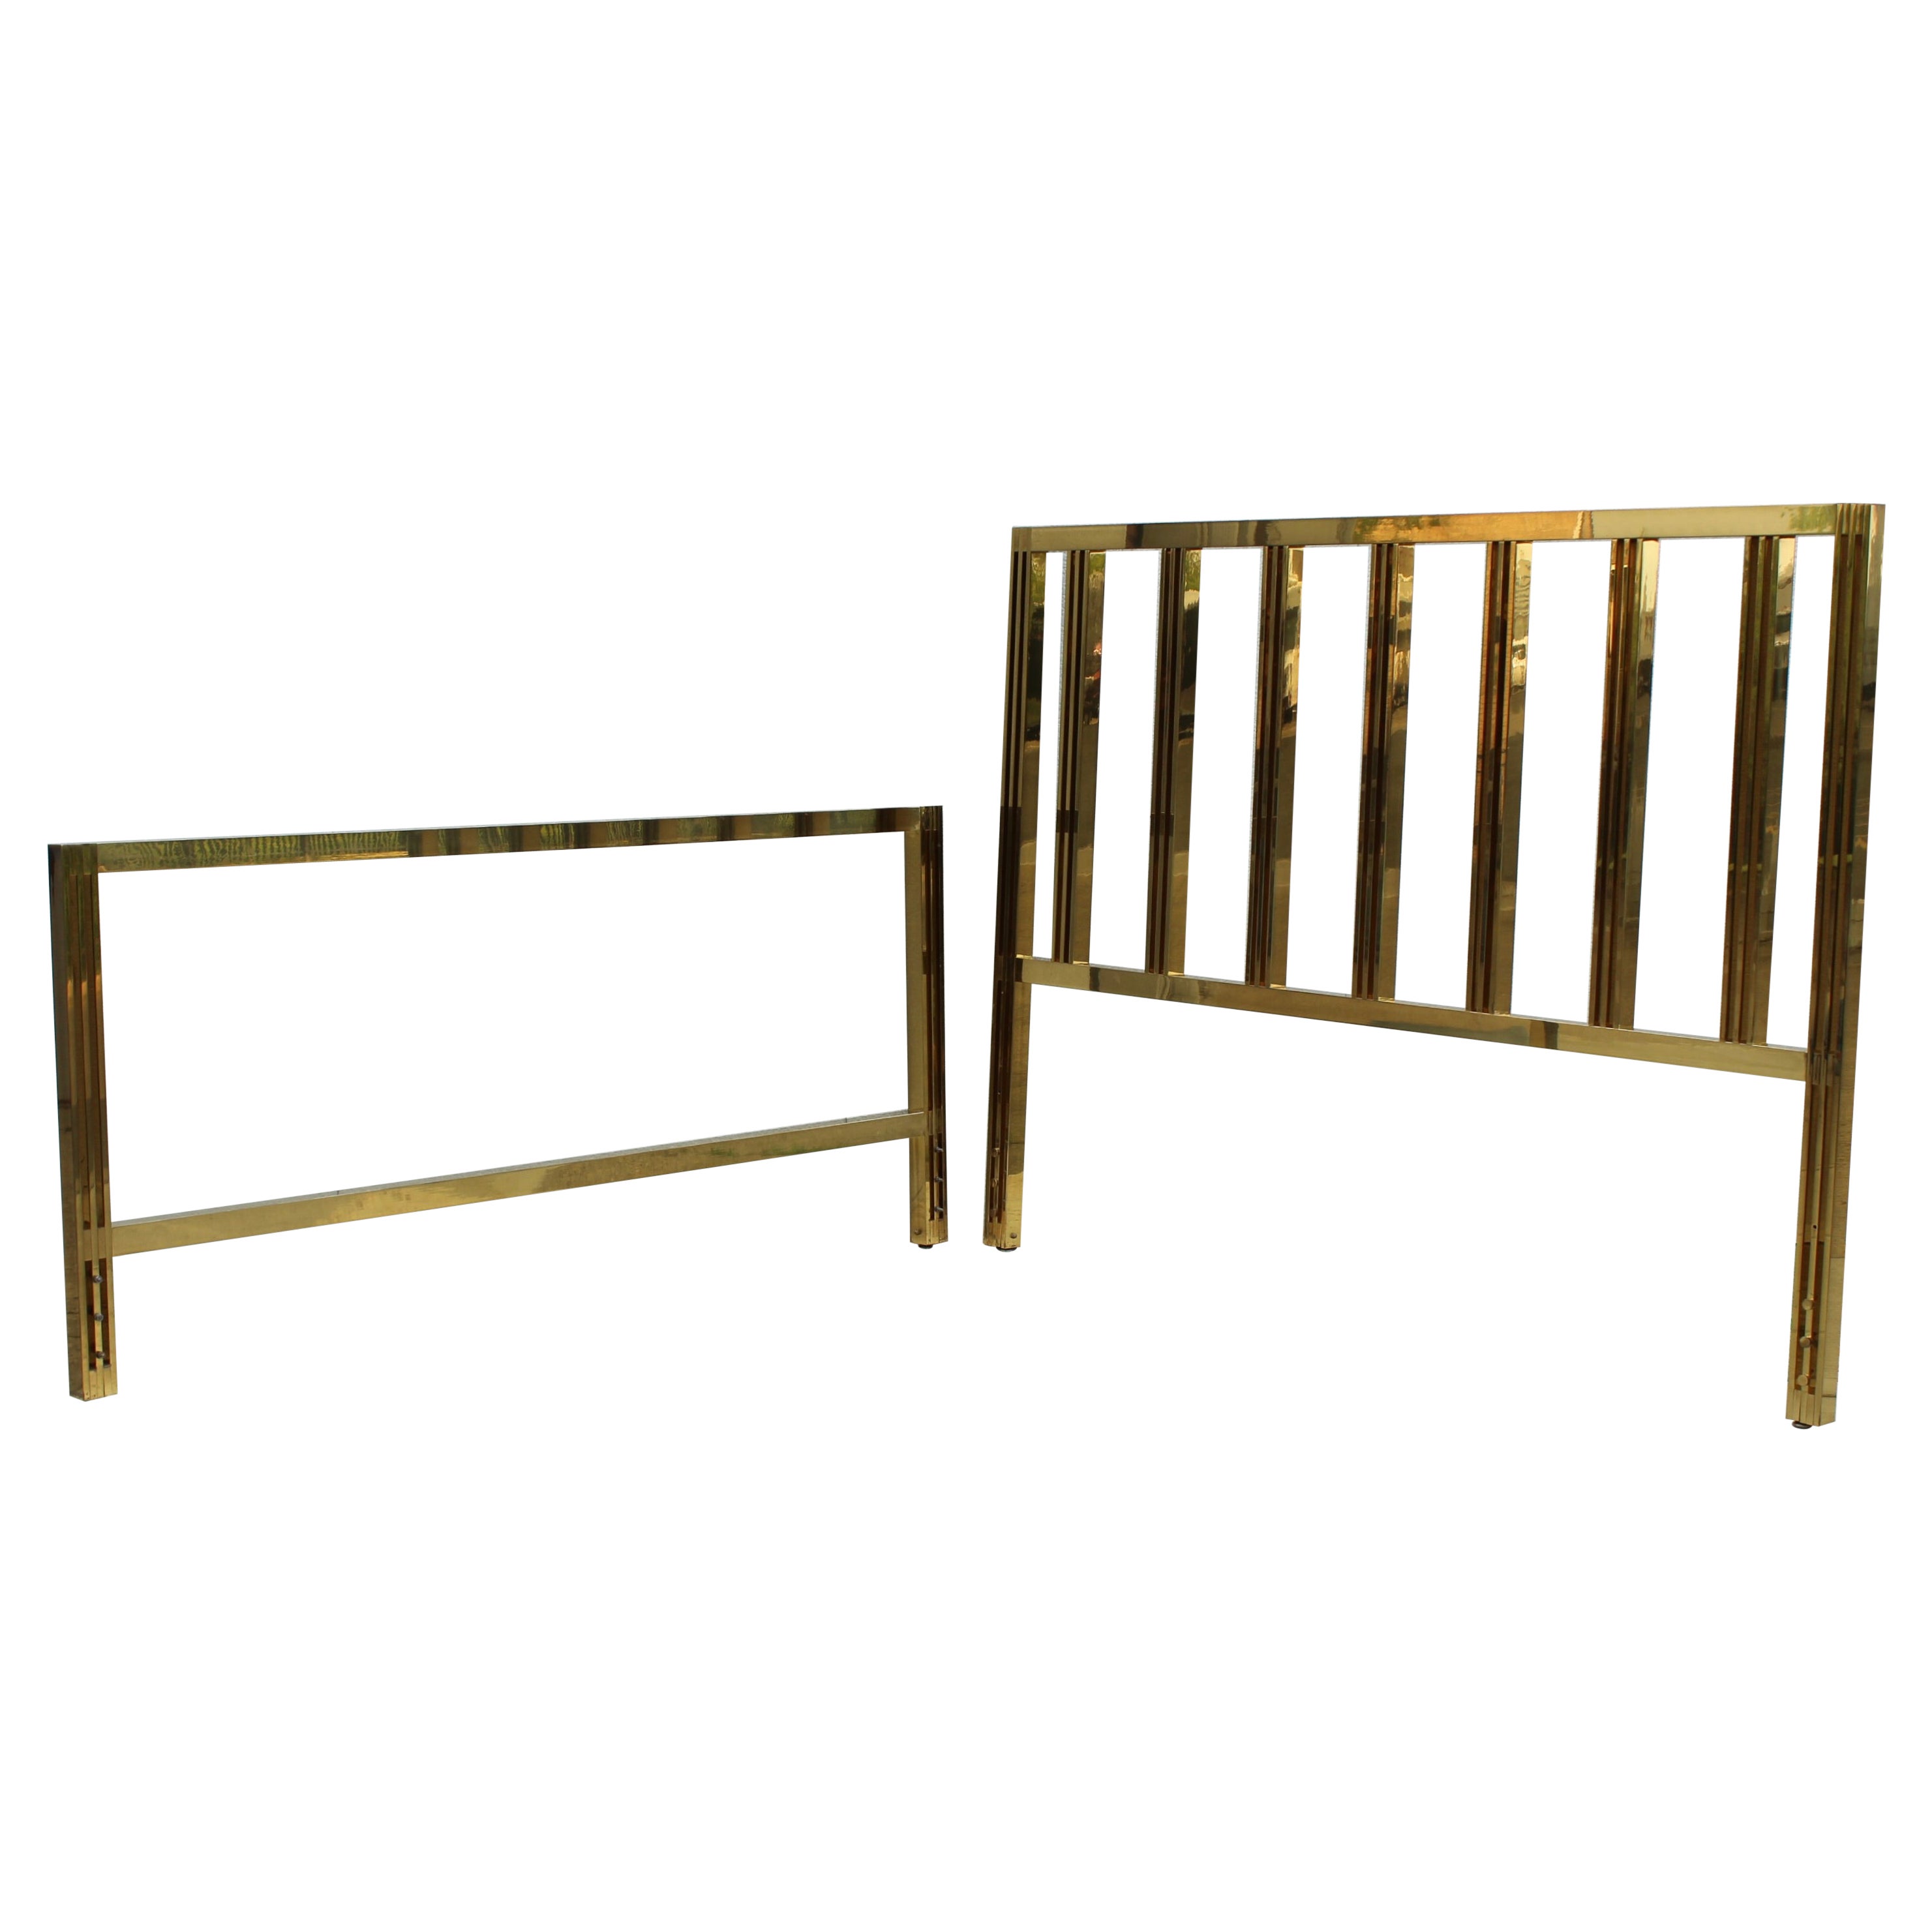 1970's Modernist Solid Brass King Size Bed